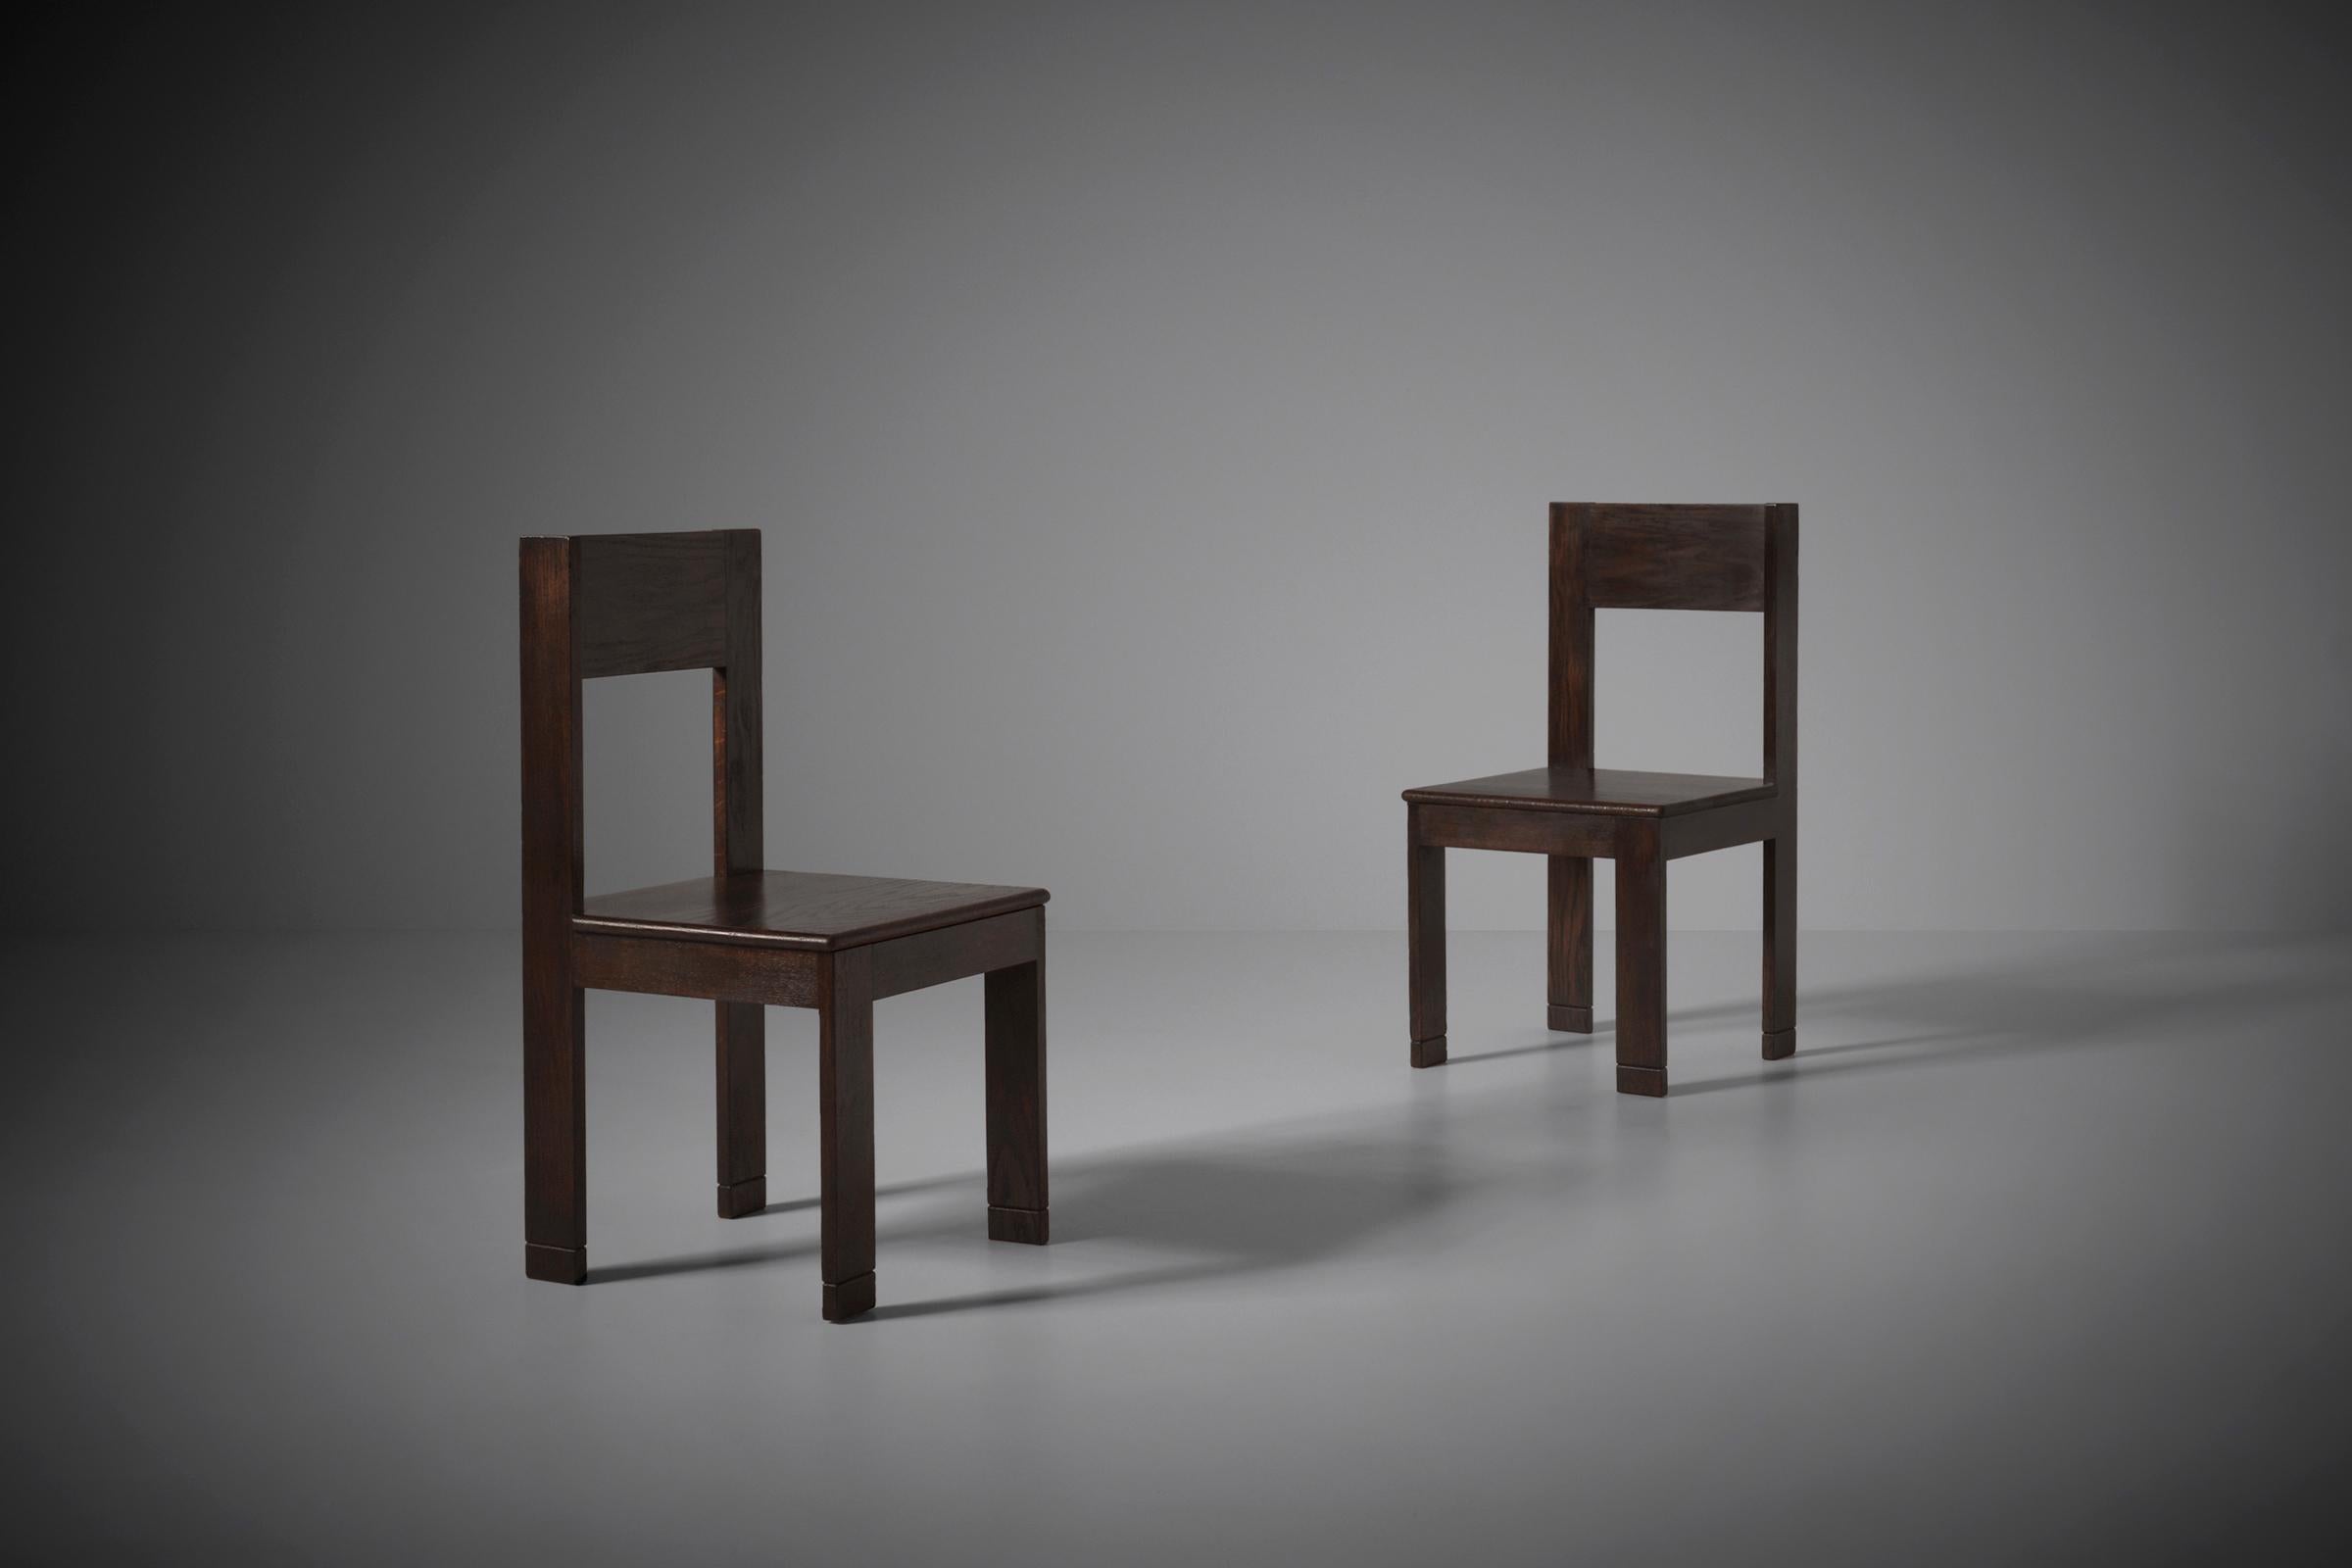 Rare pair of modernist side chairs by L.O.V. Oosterbeek, the Netherlands 1921. L.O.V. is an abbreviation of Labor Onia Vincit which means 'Work conquers all'. Designed most probably by Fritz Spanjaard who became the artistic director of L.O.V. in